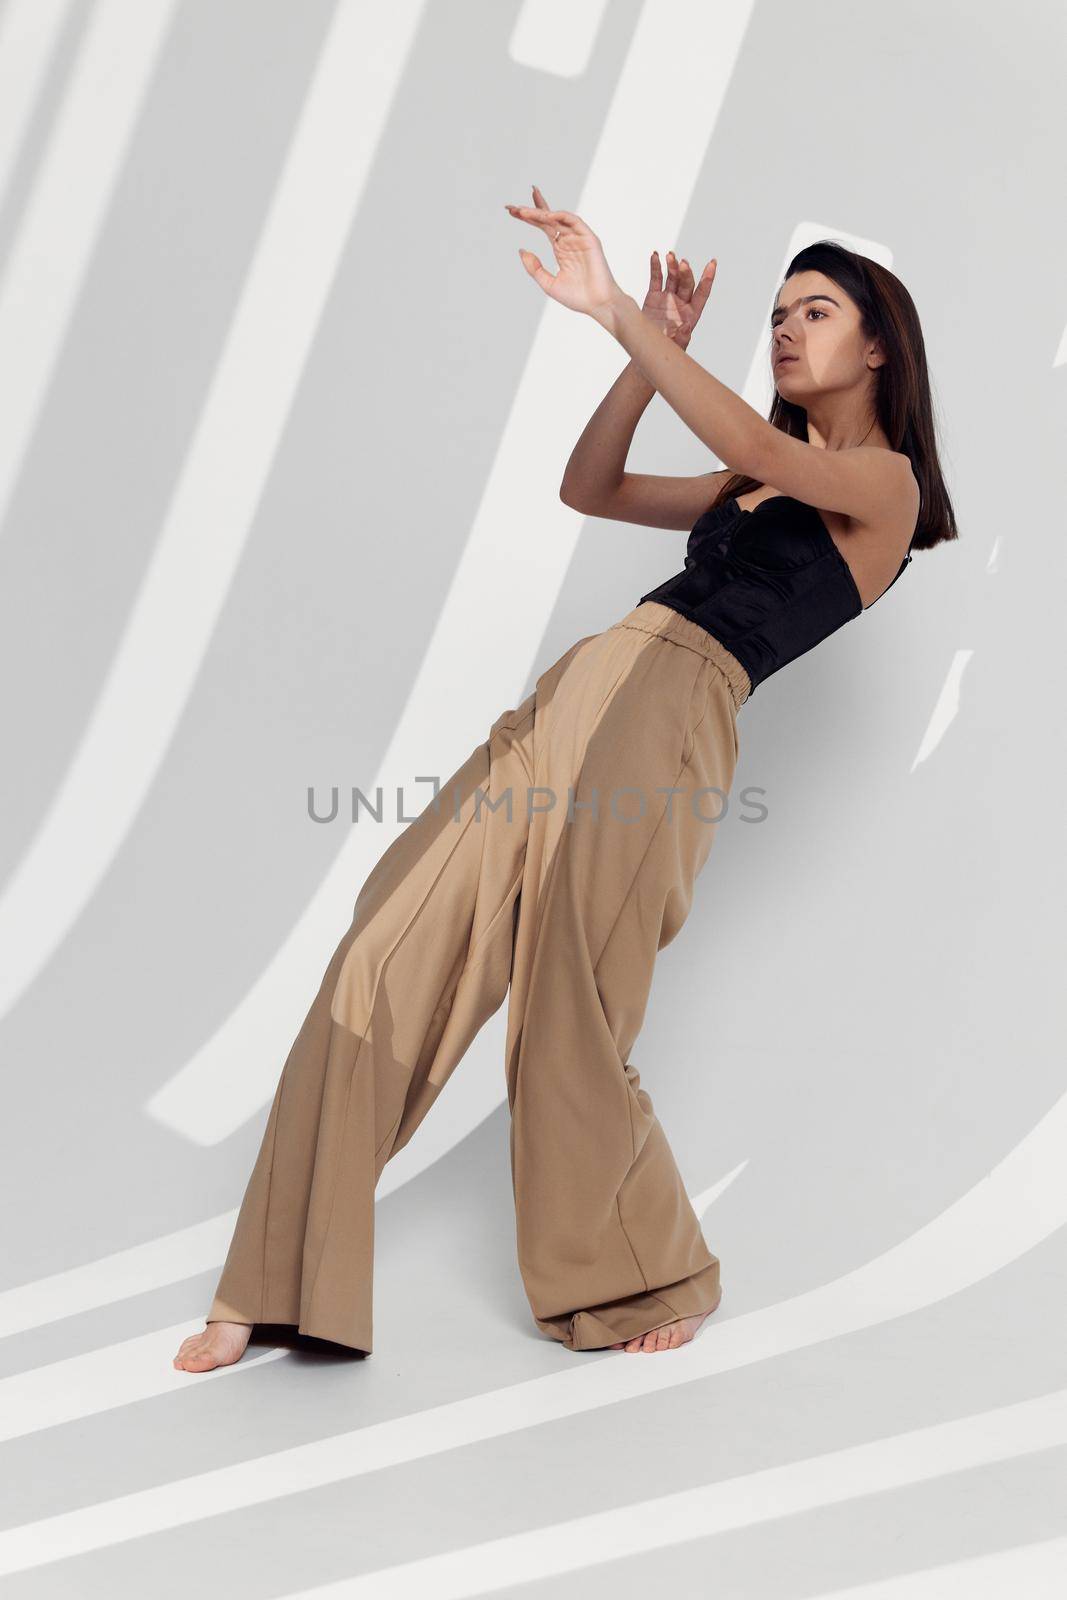 attractive woman in beige pants and black top gestures with her hands. High quality photo